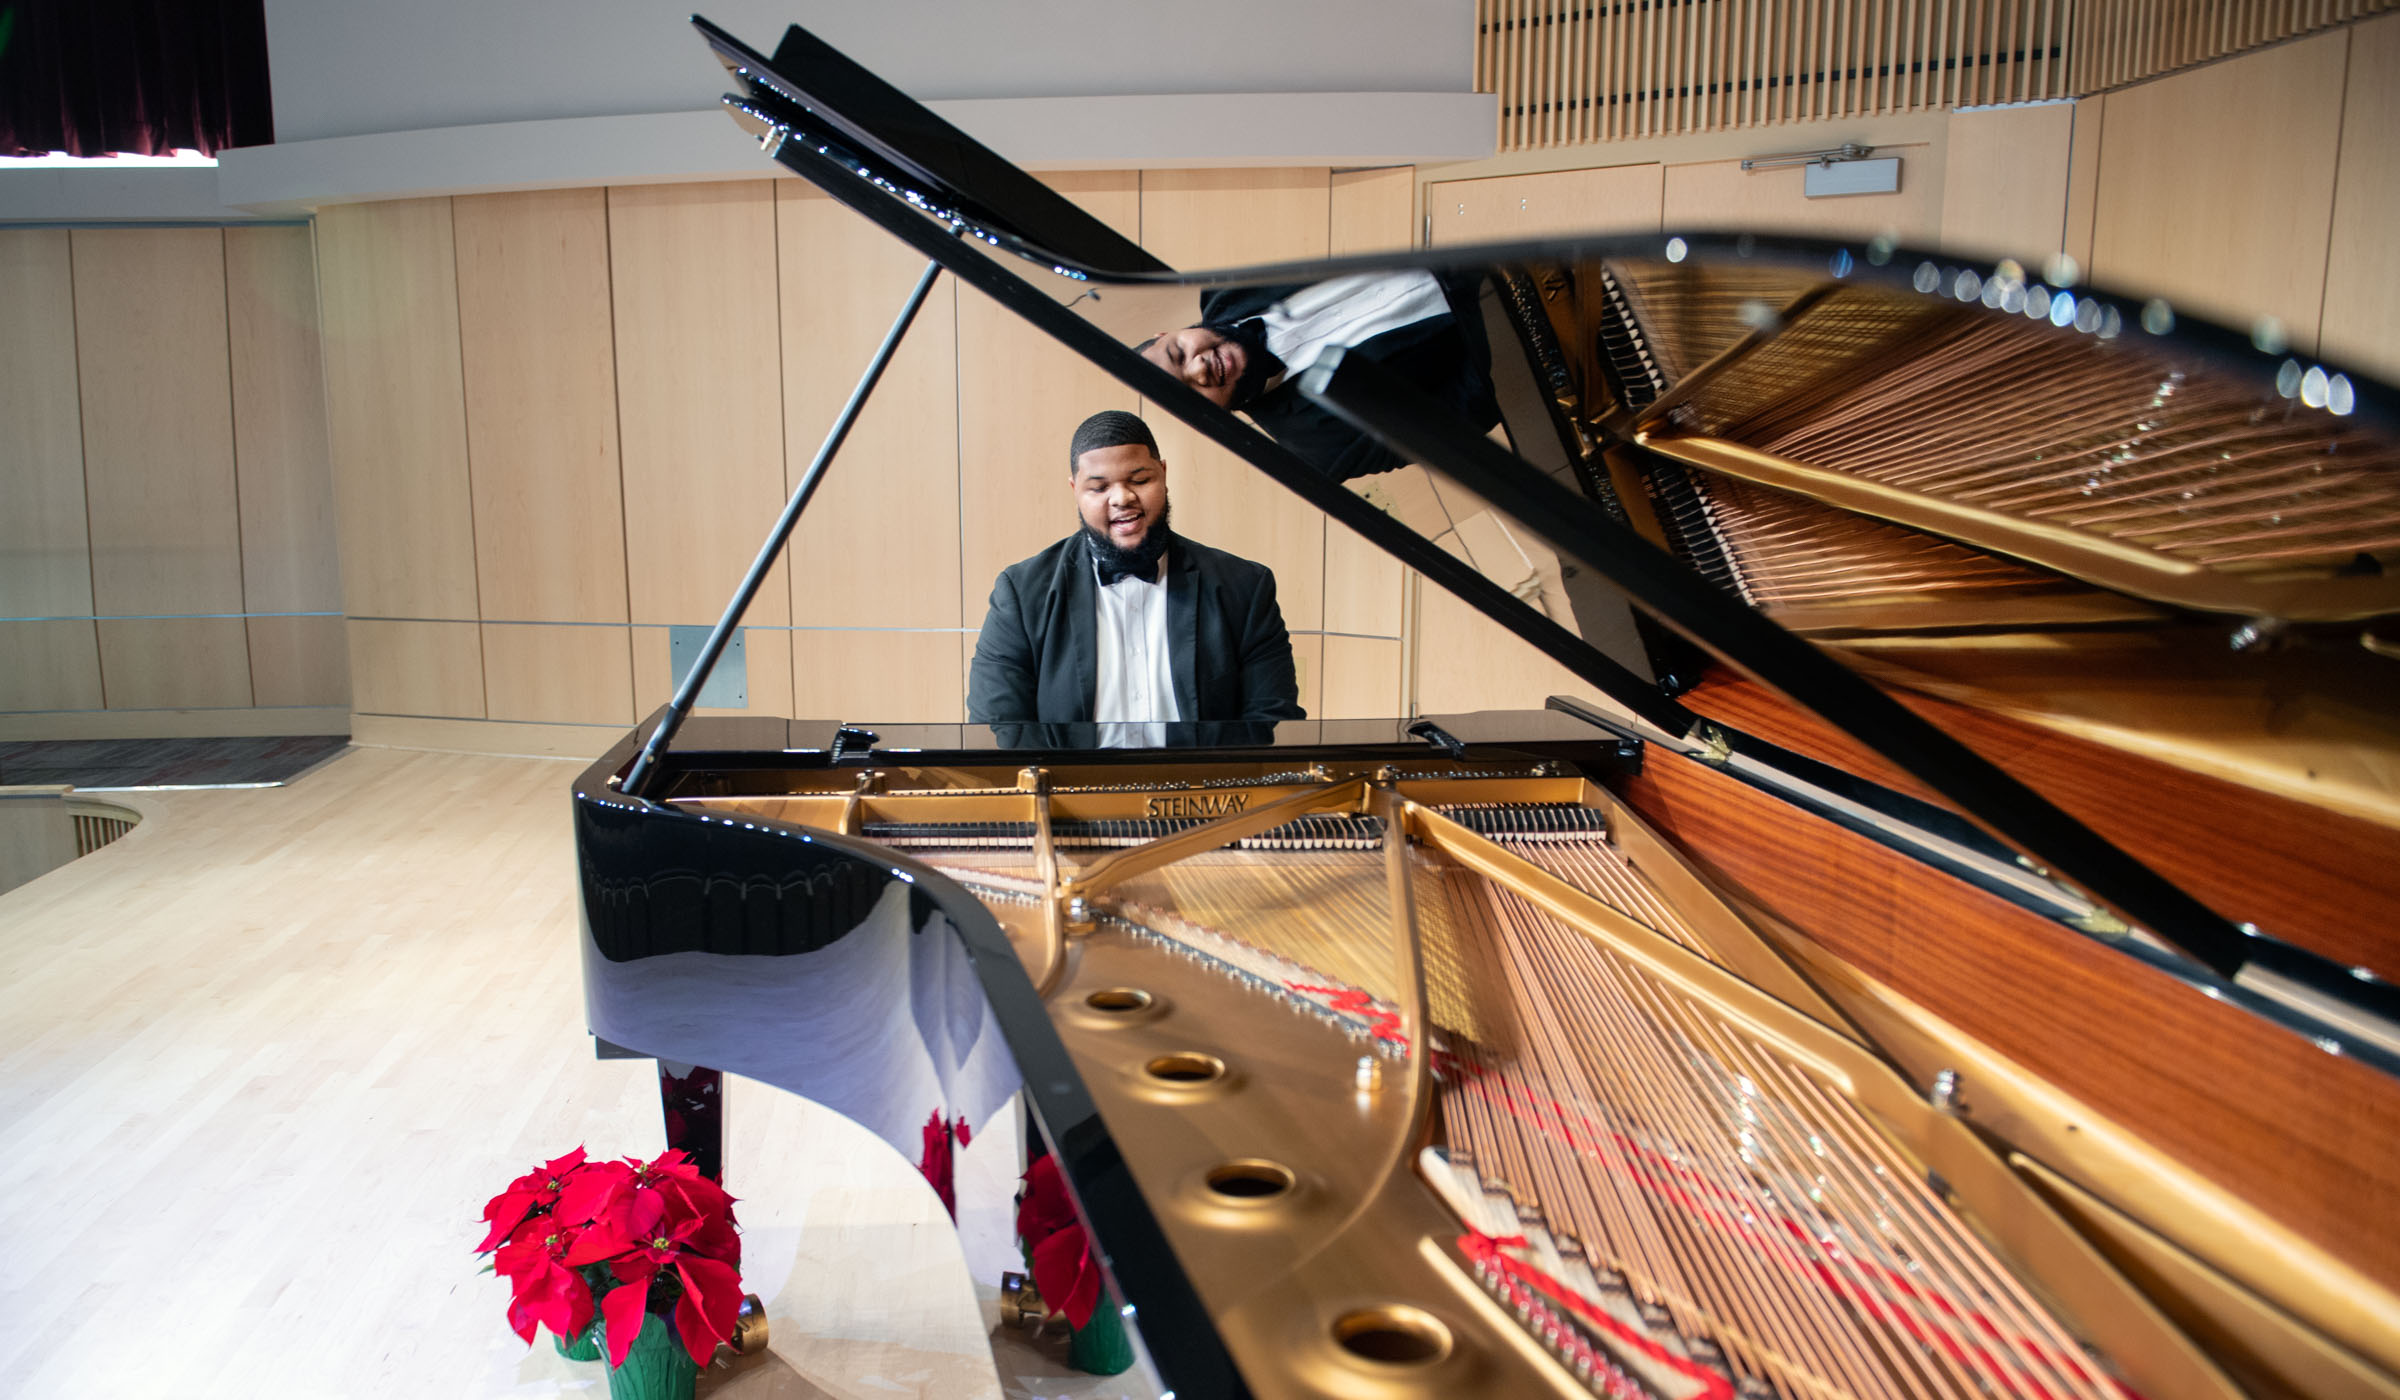 Desmond Henderson, pictured playing a Steinway piano in MSU's new Music Building